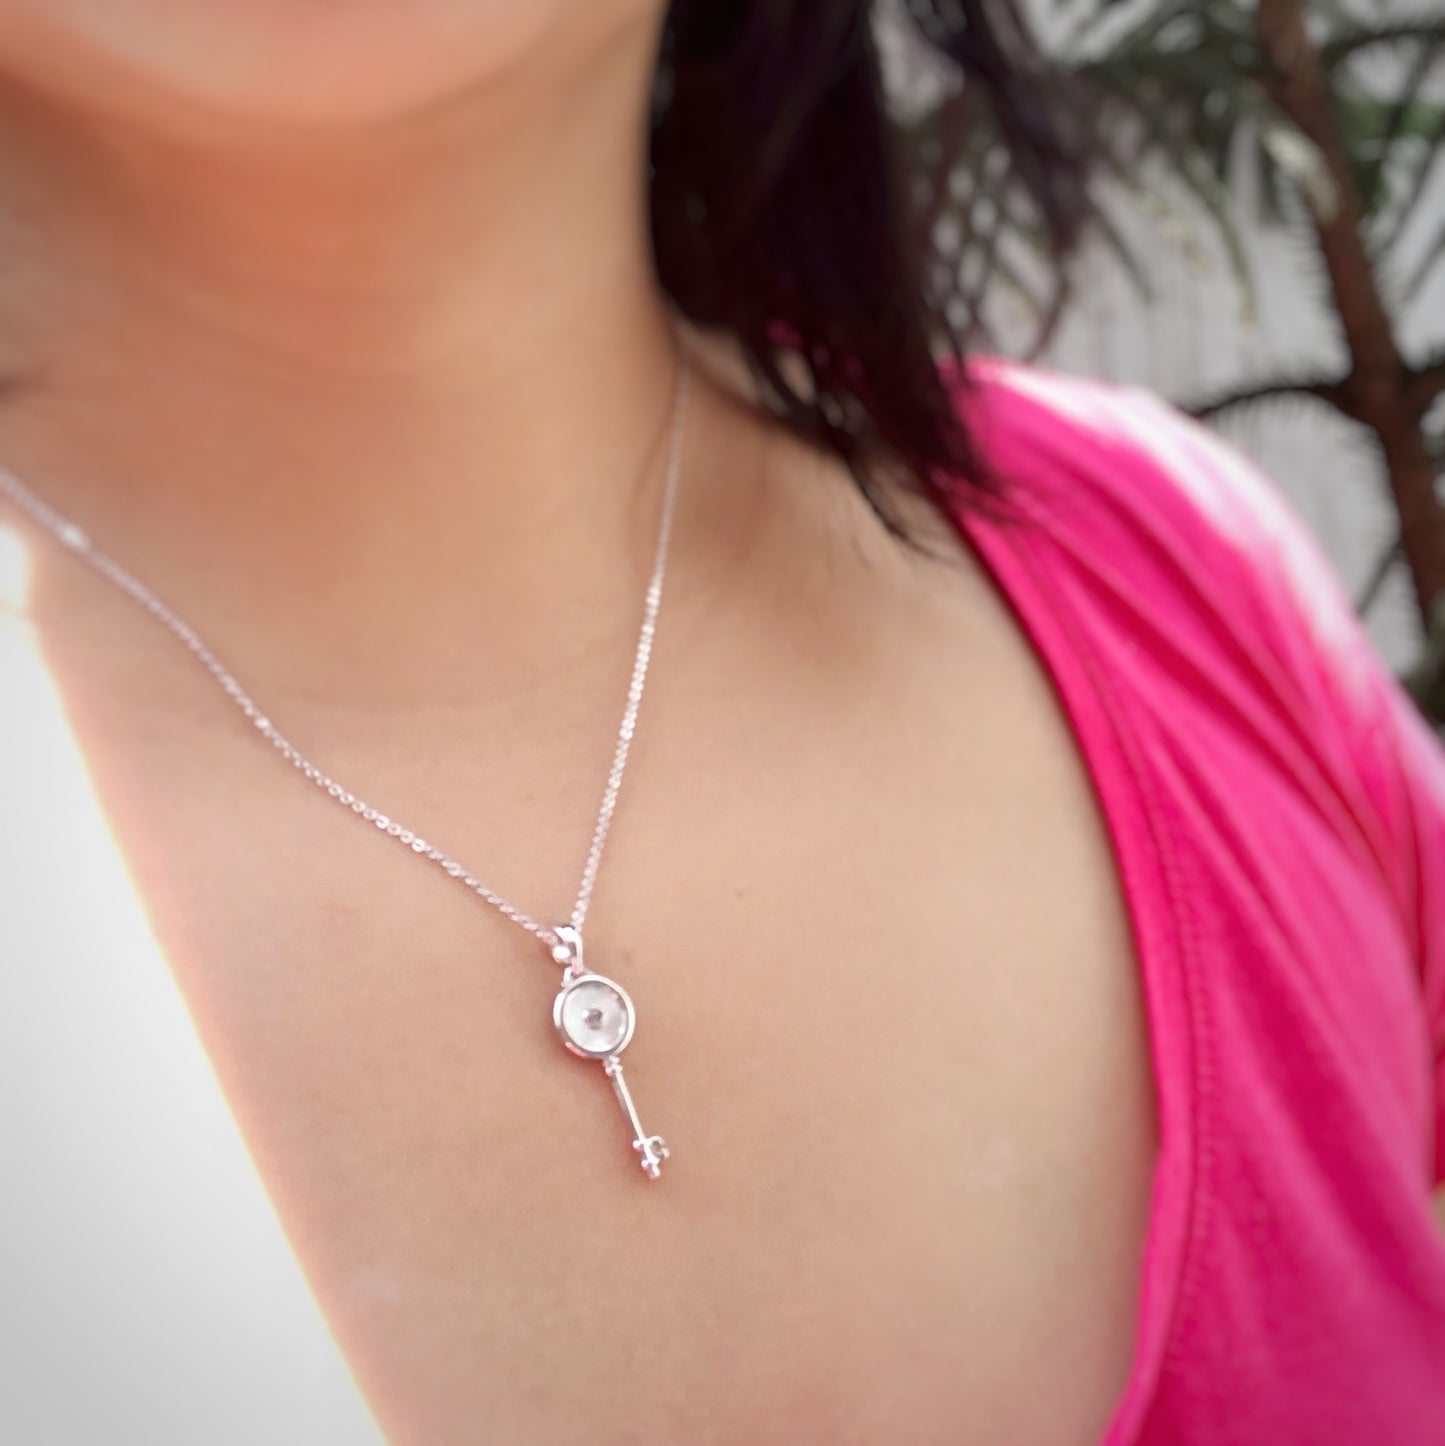 Mother of Pearl Key Necklace in Whitegold Tone